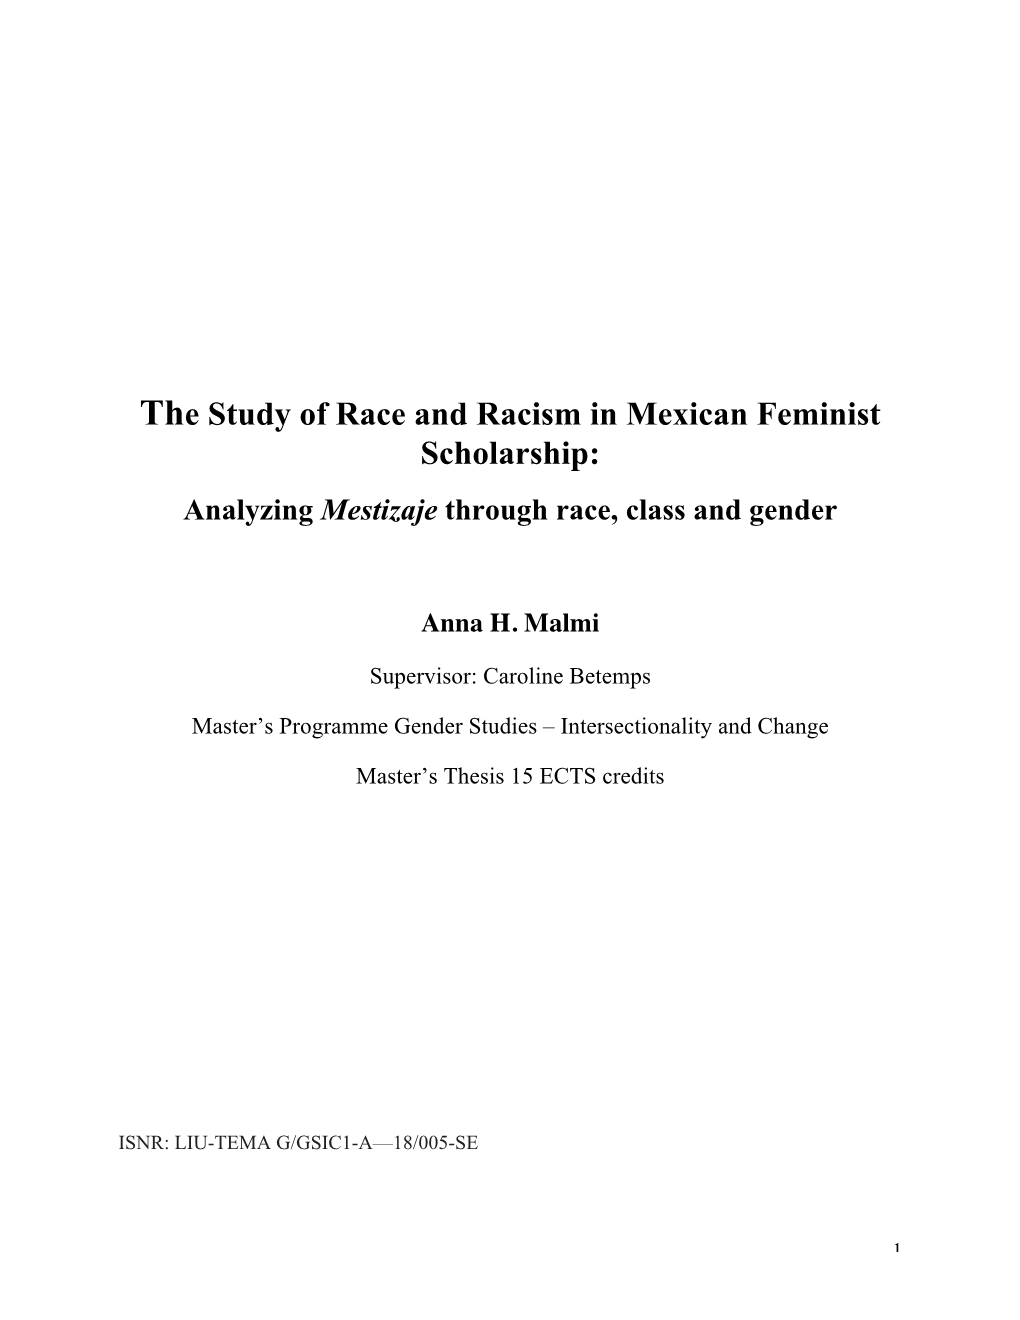 The Study of Race and Racism in Mexican Feminist Scholarship: Analyzing Mestizaje Through Race, Class and Gender